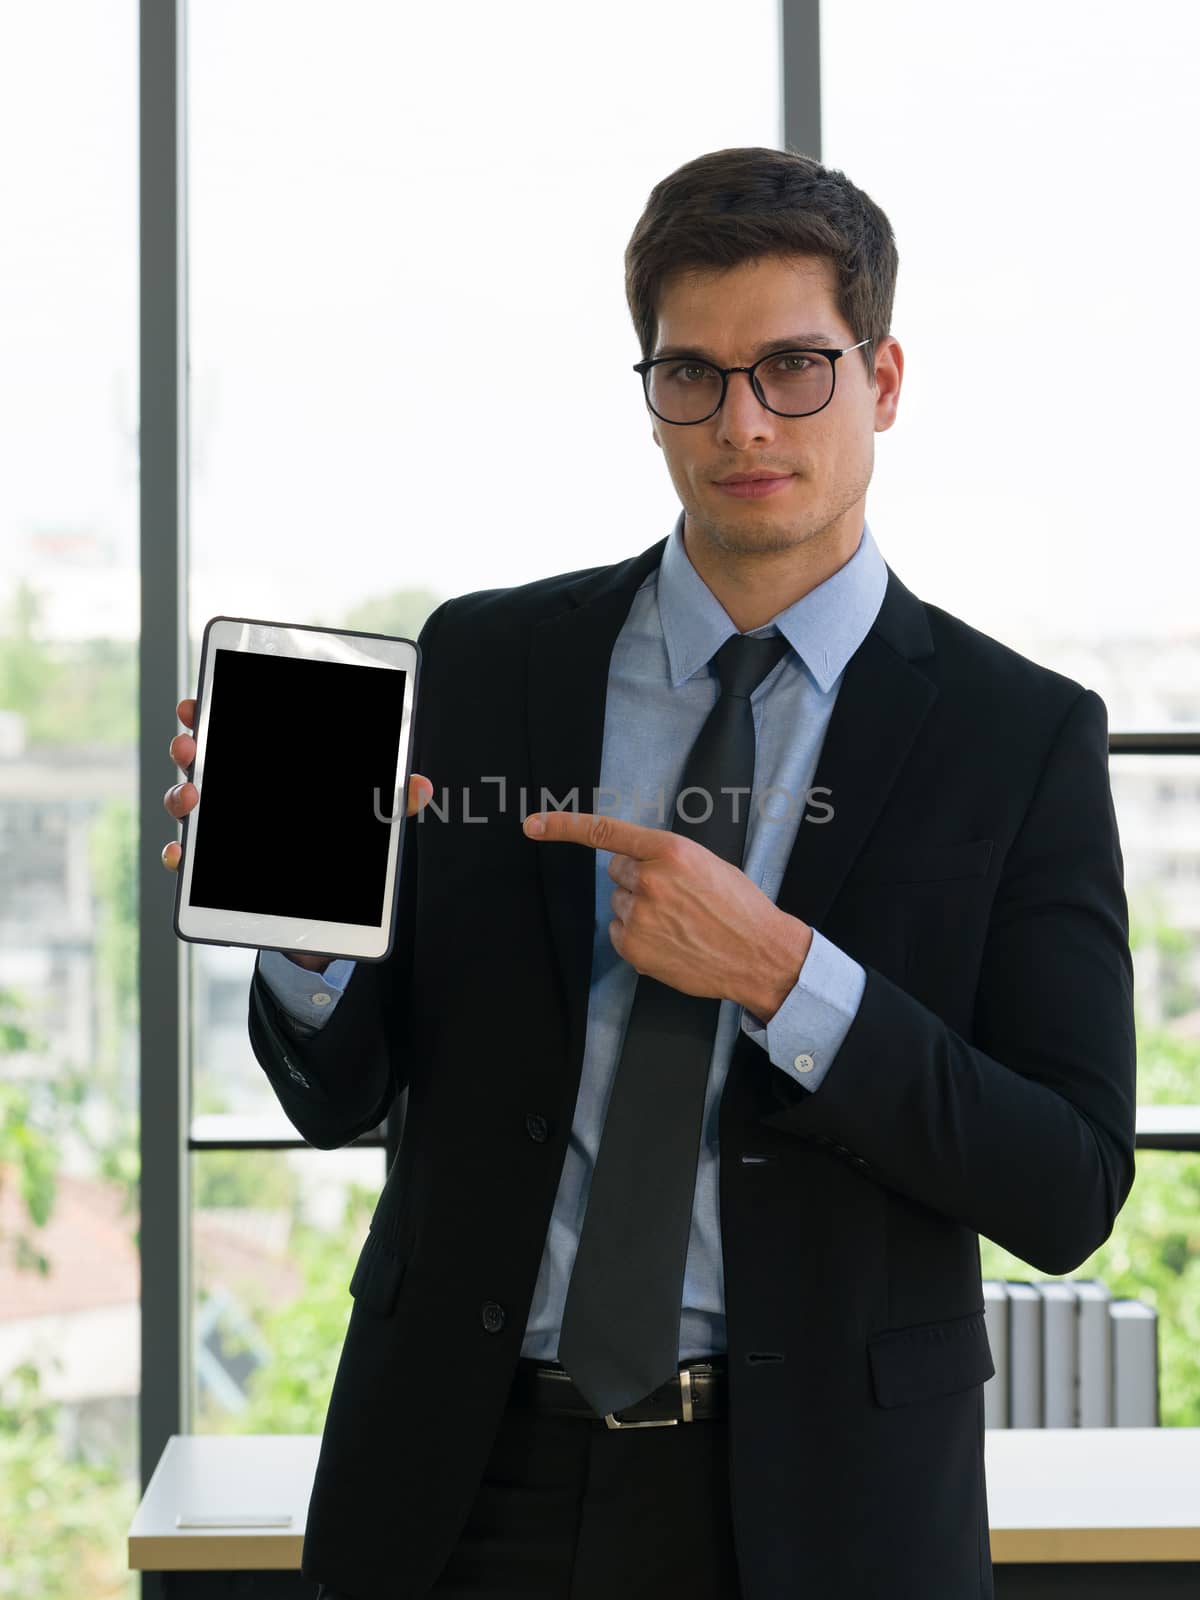 Business people in suits and ties pointing his finger at a blank screen tablet computer. Morning work atmosphere In a modern office.